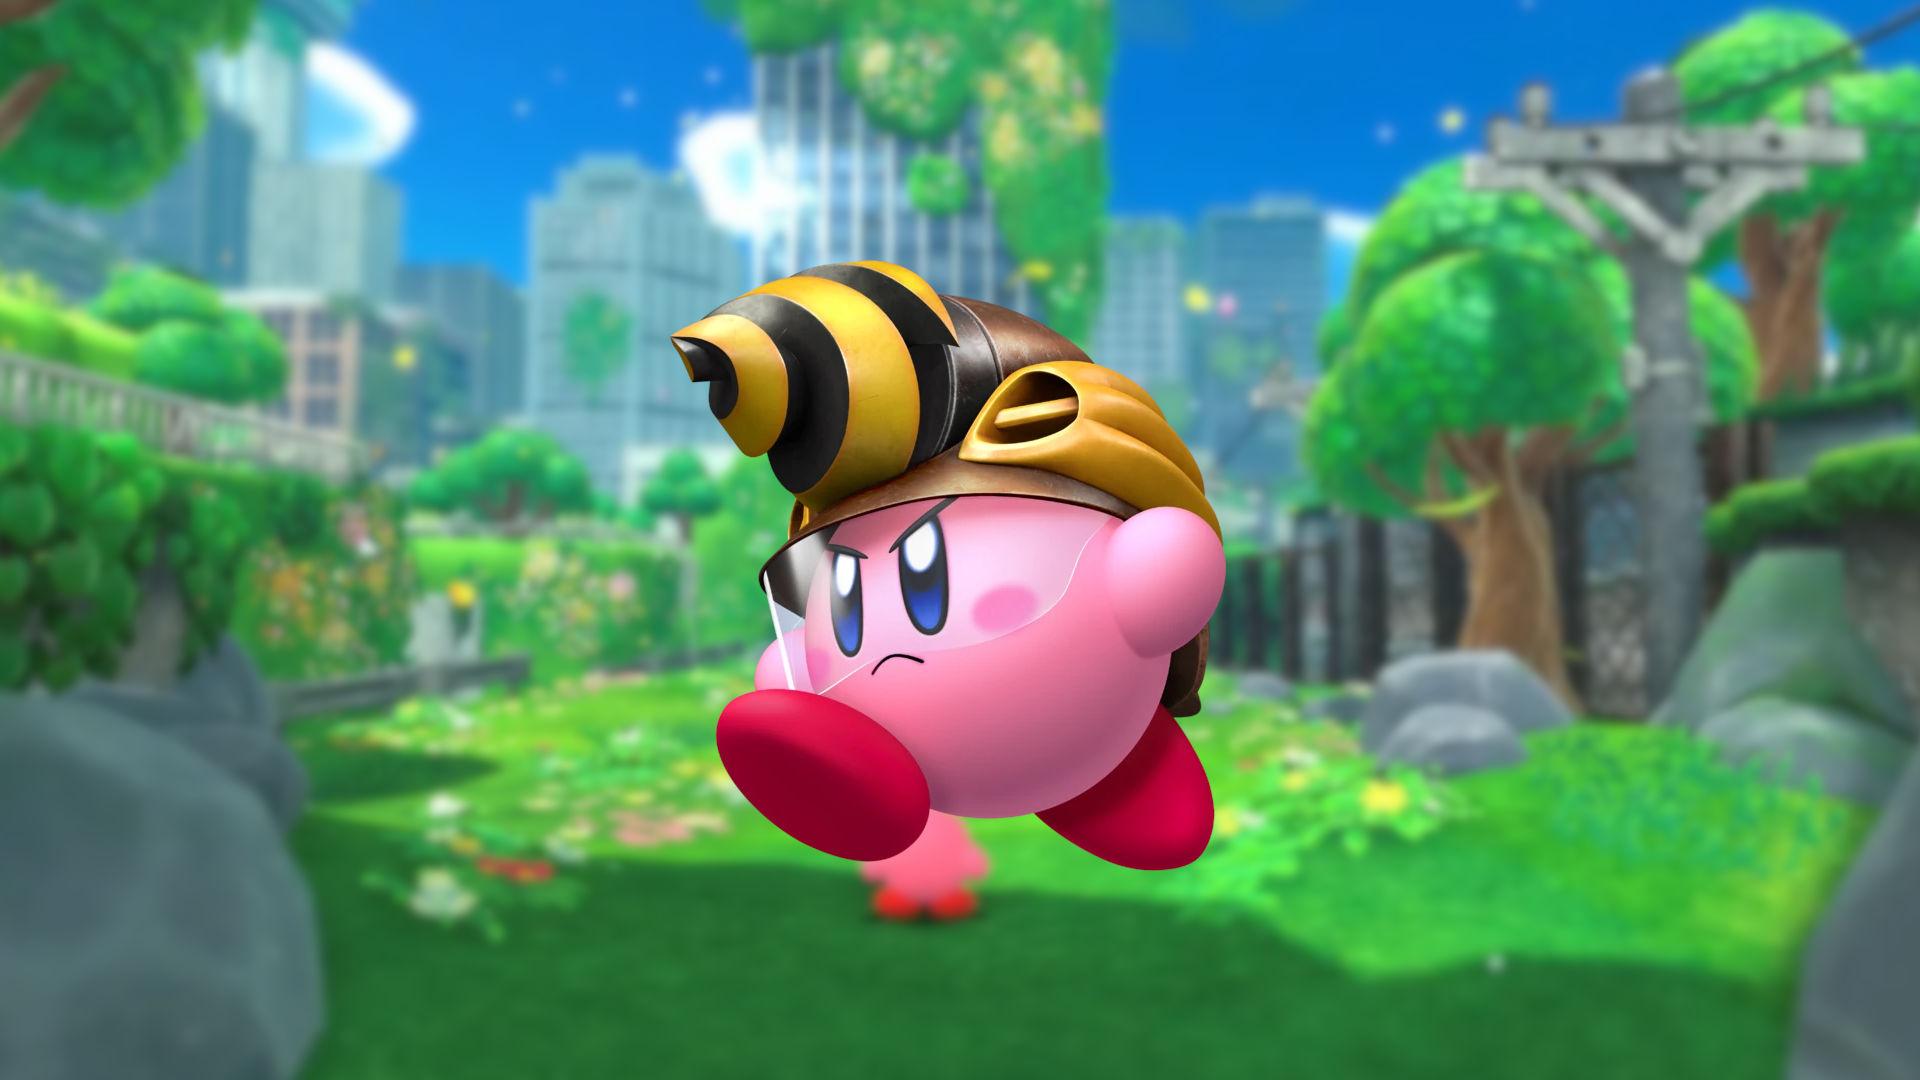 Copy ability upgrade locations in Kirby and the Forgotten Land